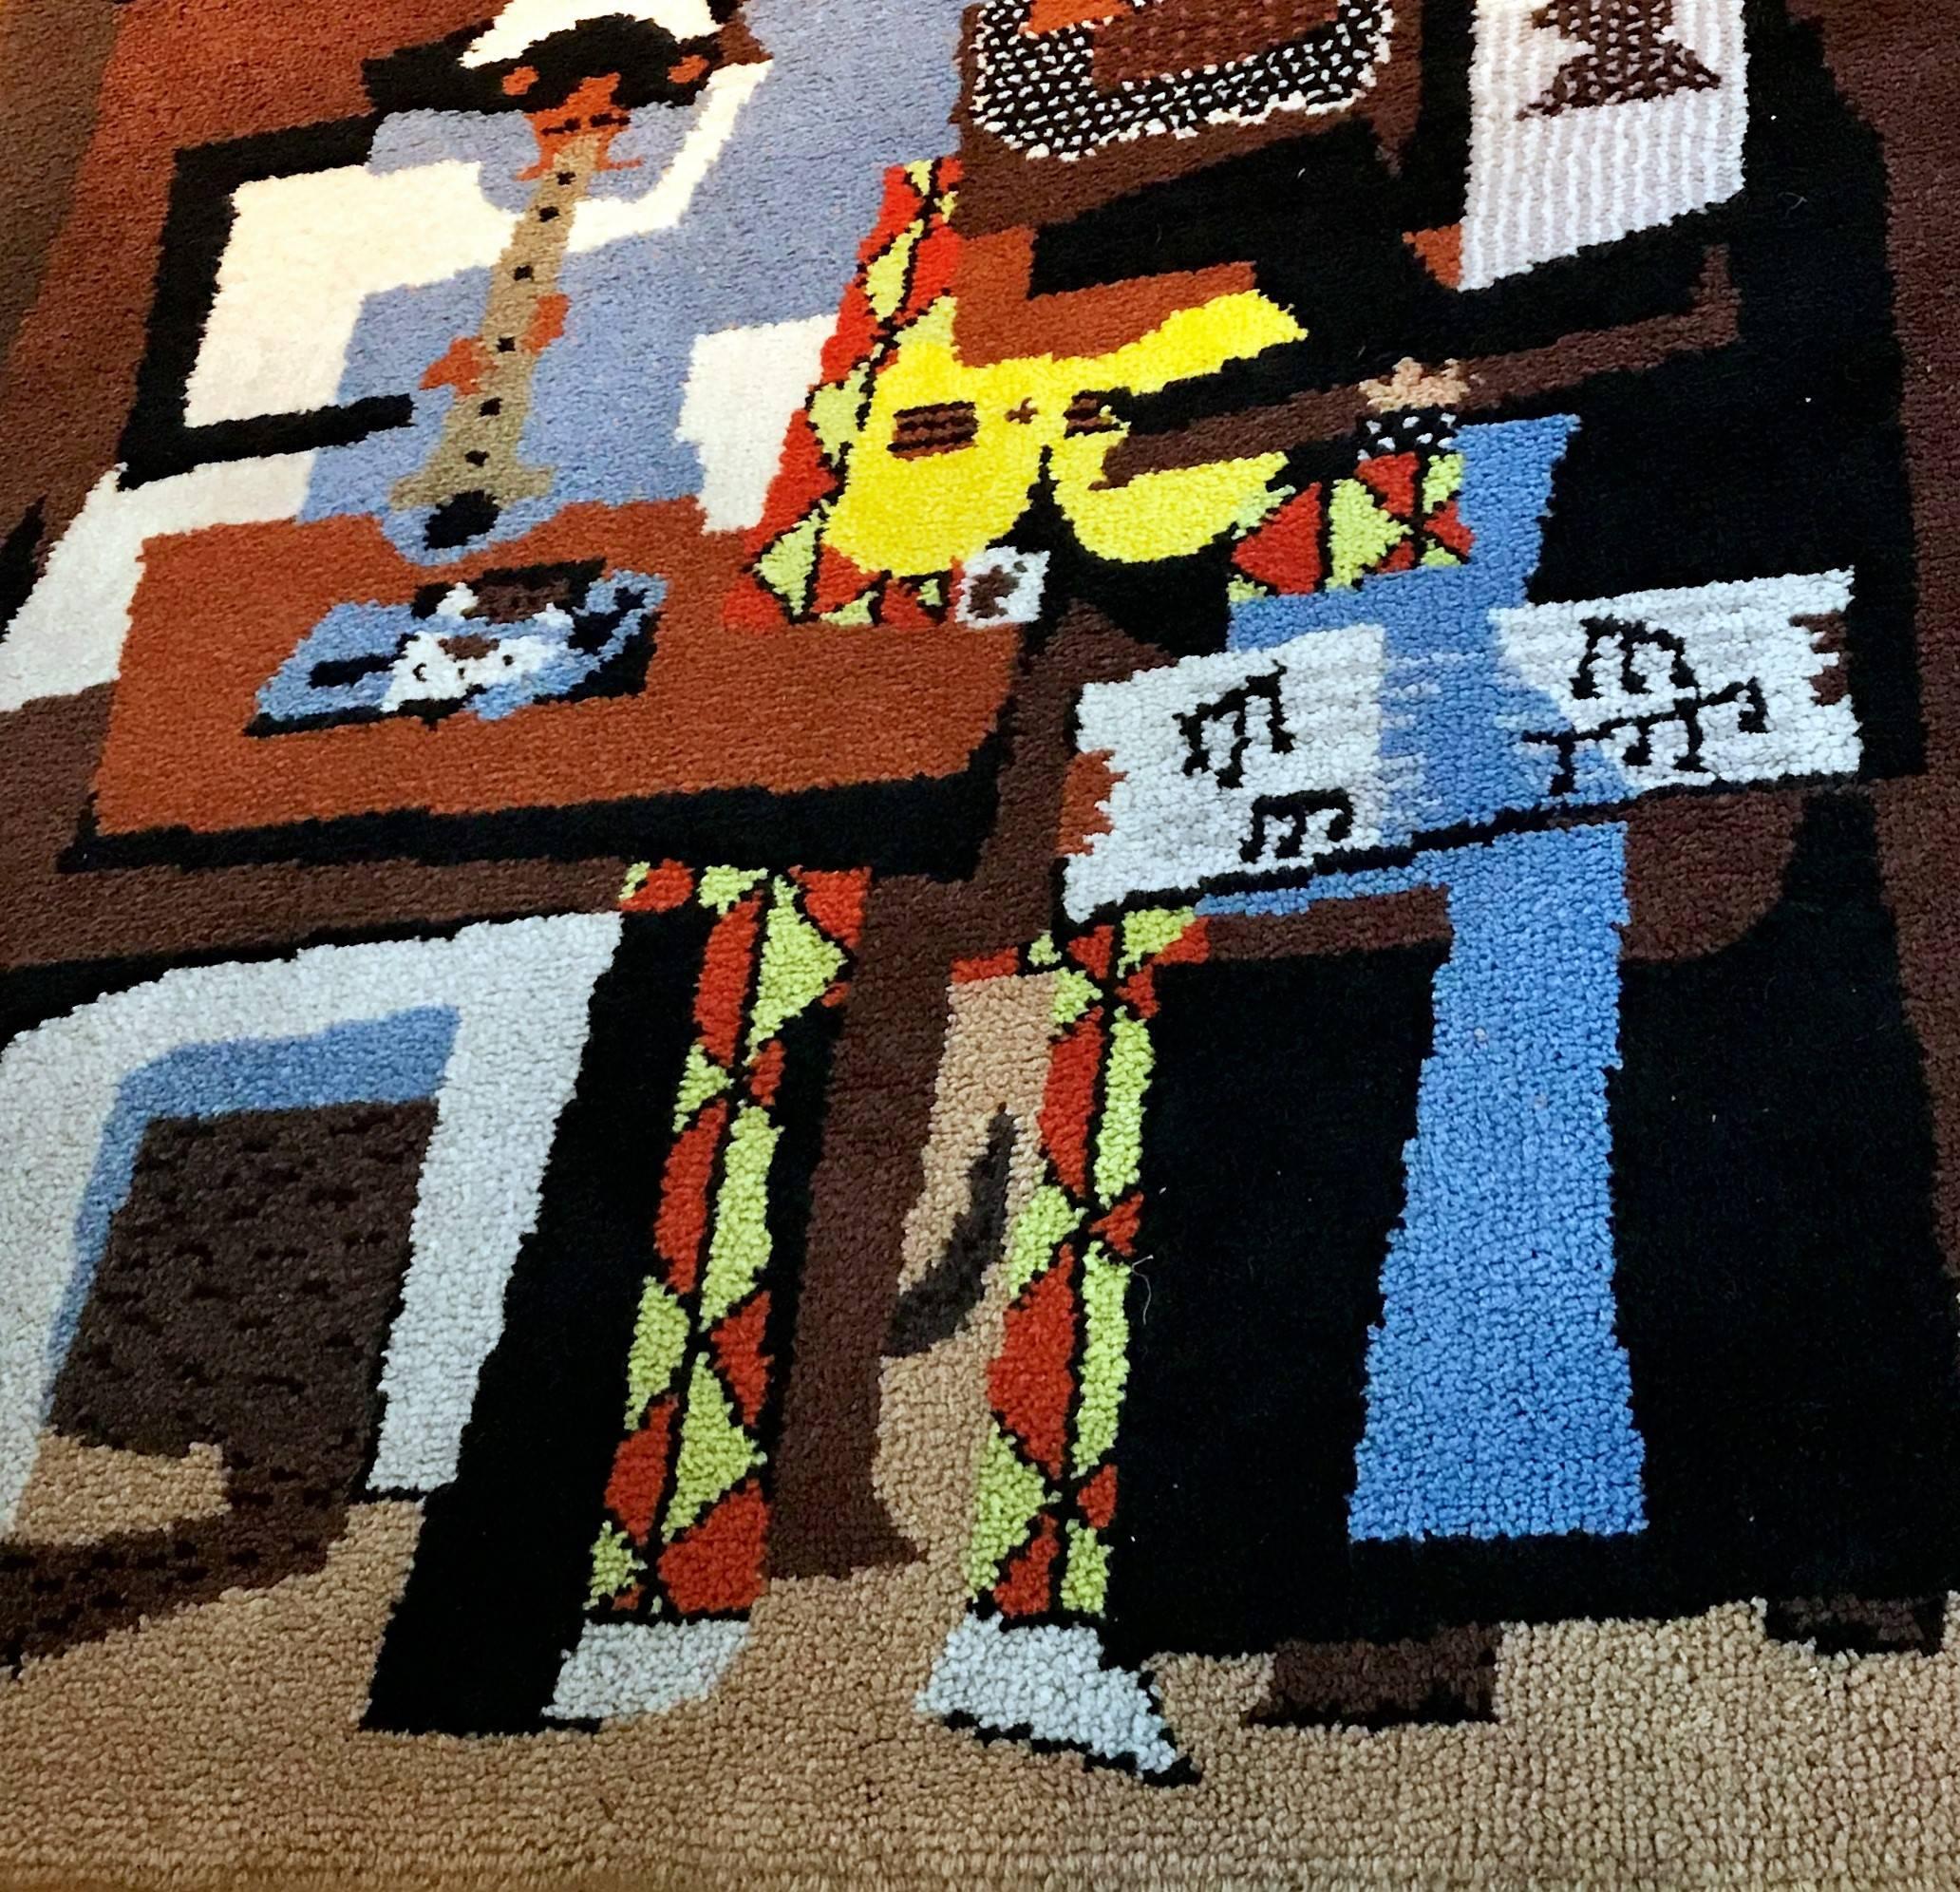 Vintage Austrian fine wool carpet handmade in late 1970s in Tyrol/Austria.
It was hanging on the wall since its creation. 
It can be also used as a floor carpet.
The creator was inspired by 20th century genius Pablo Picasso and his masterpice 